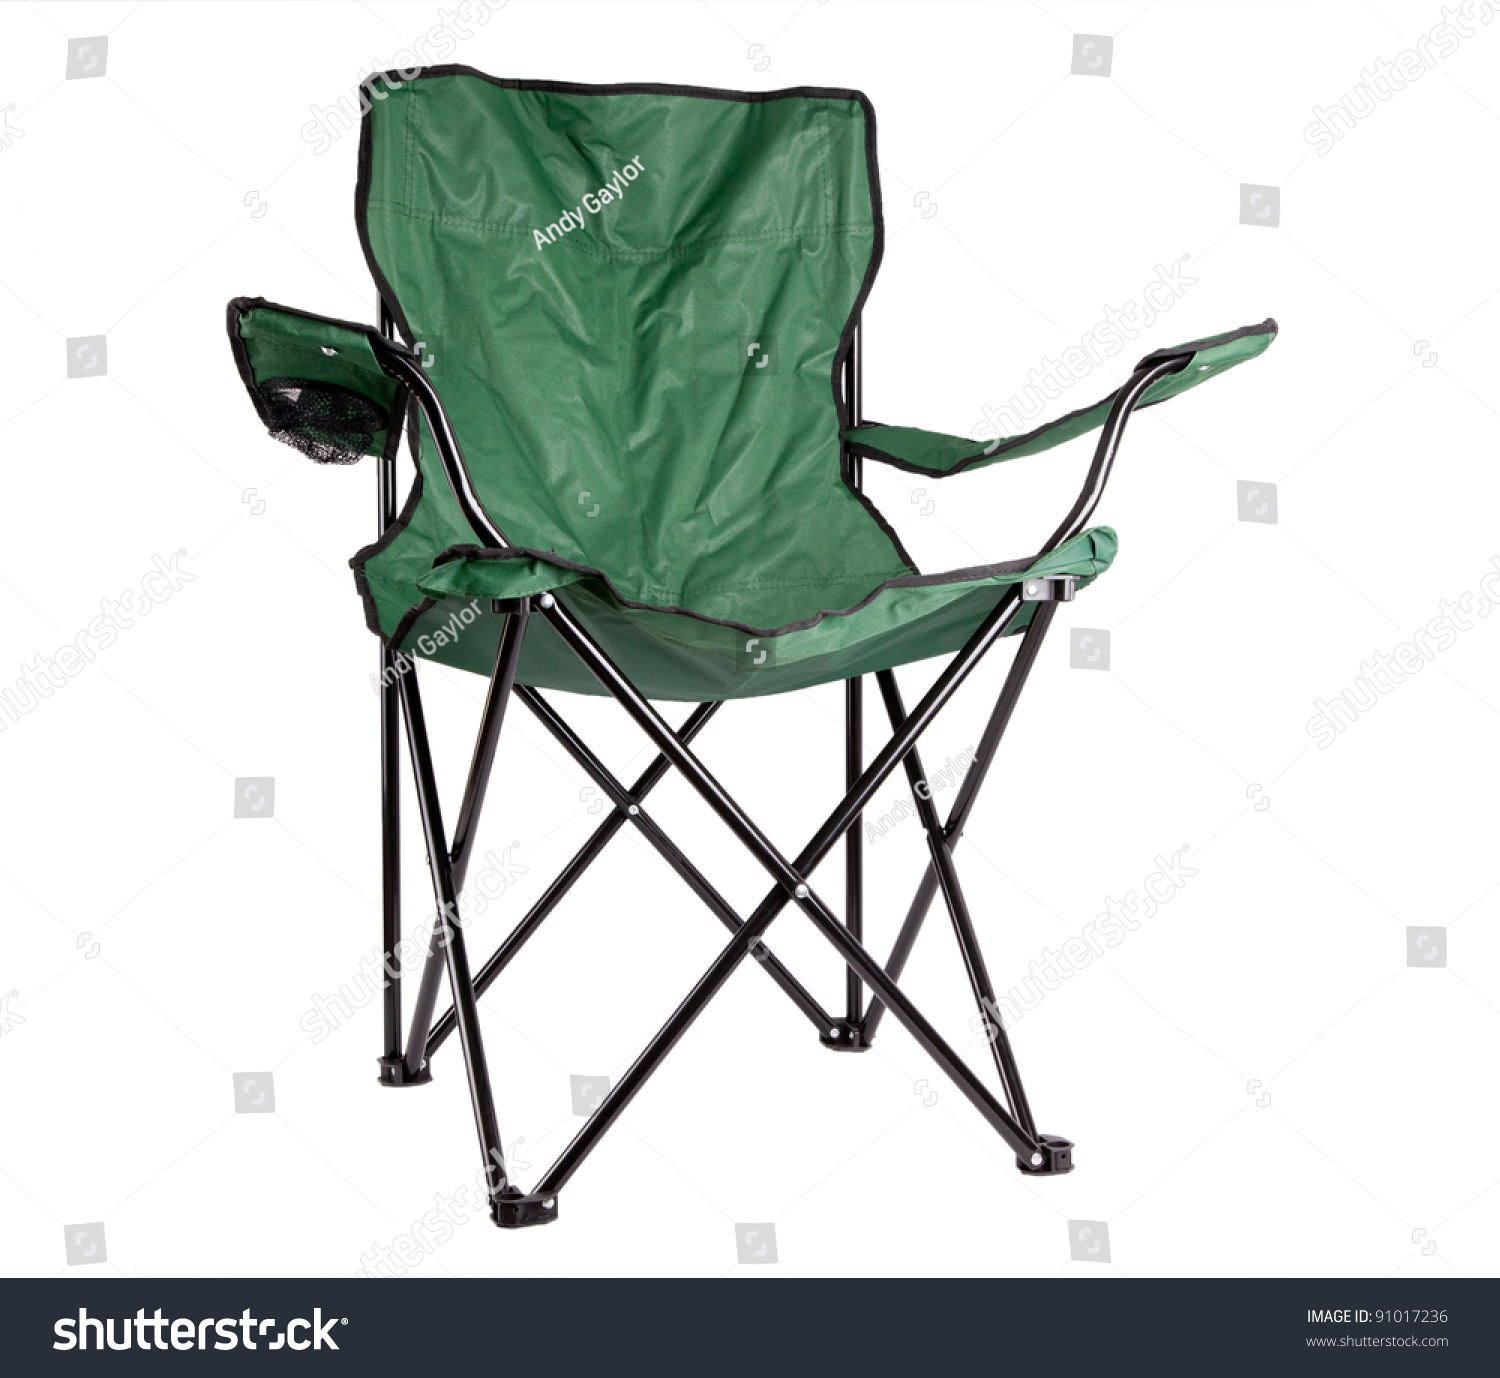 Fold Up Chair Isolated On White Stock Photo 91017236 : Shutterstock